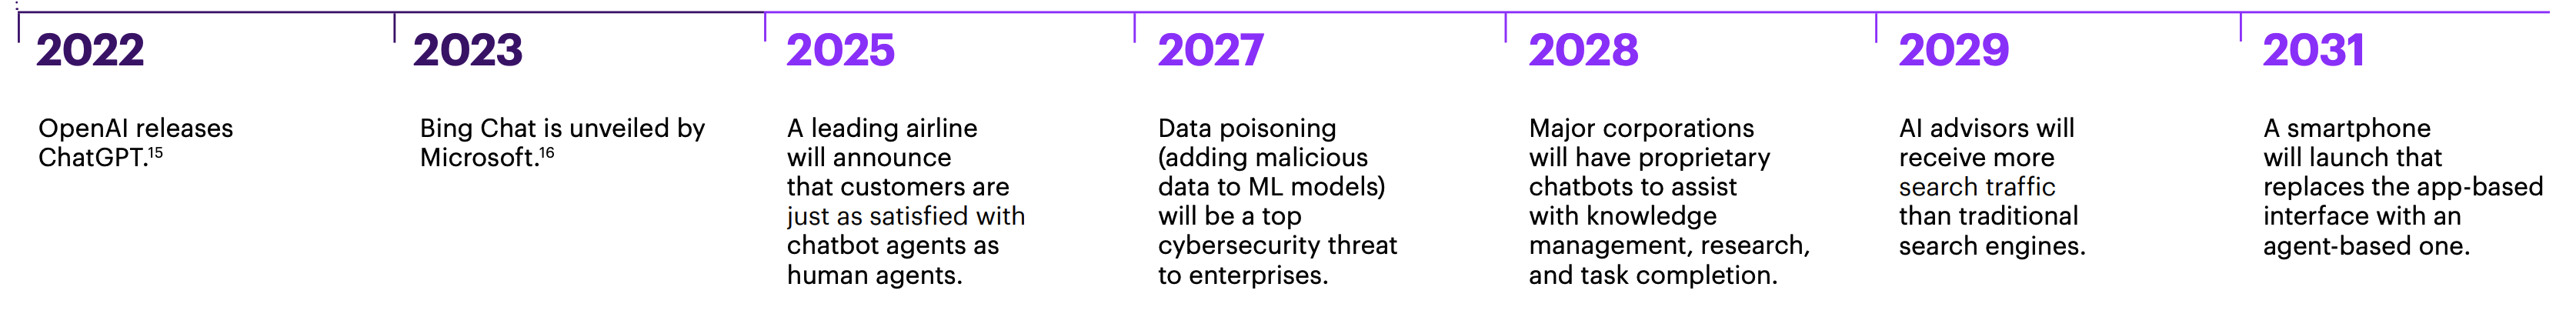 Top trends in 2024 as seen by Accenture on a time axis